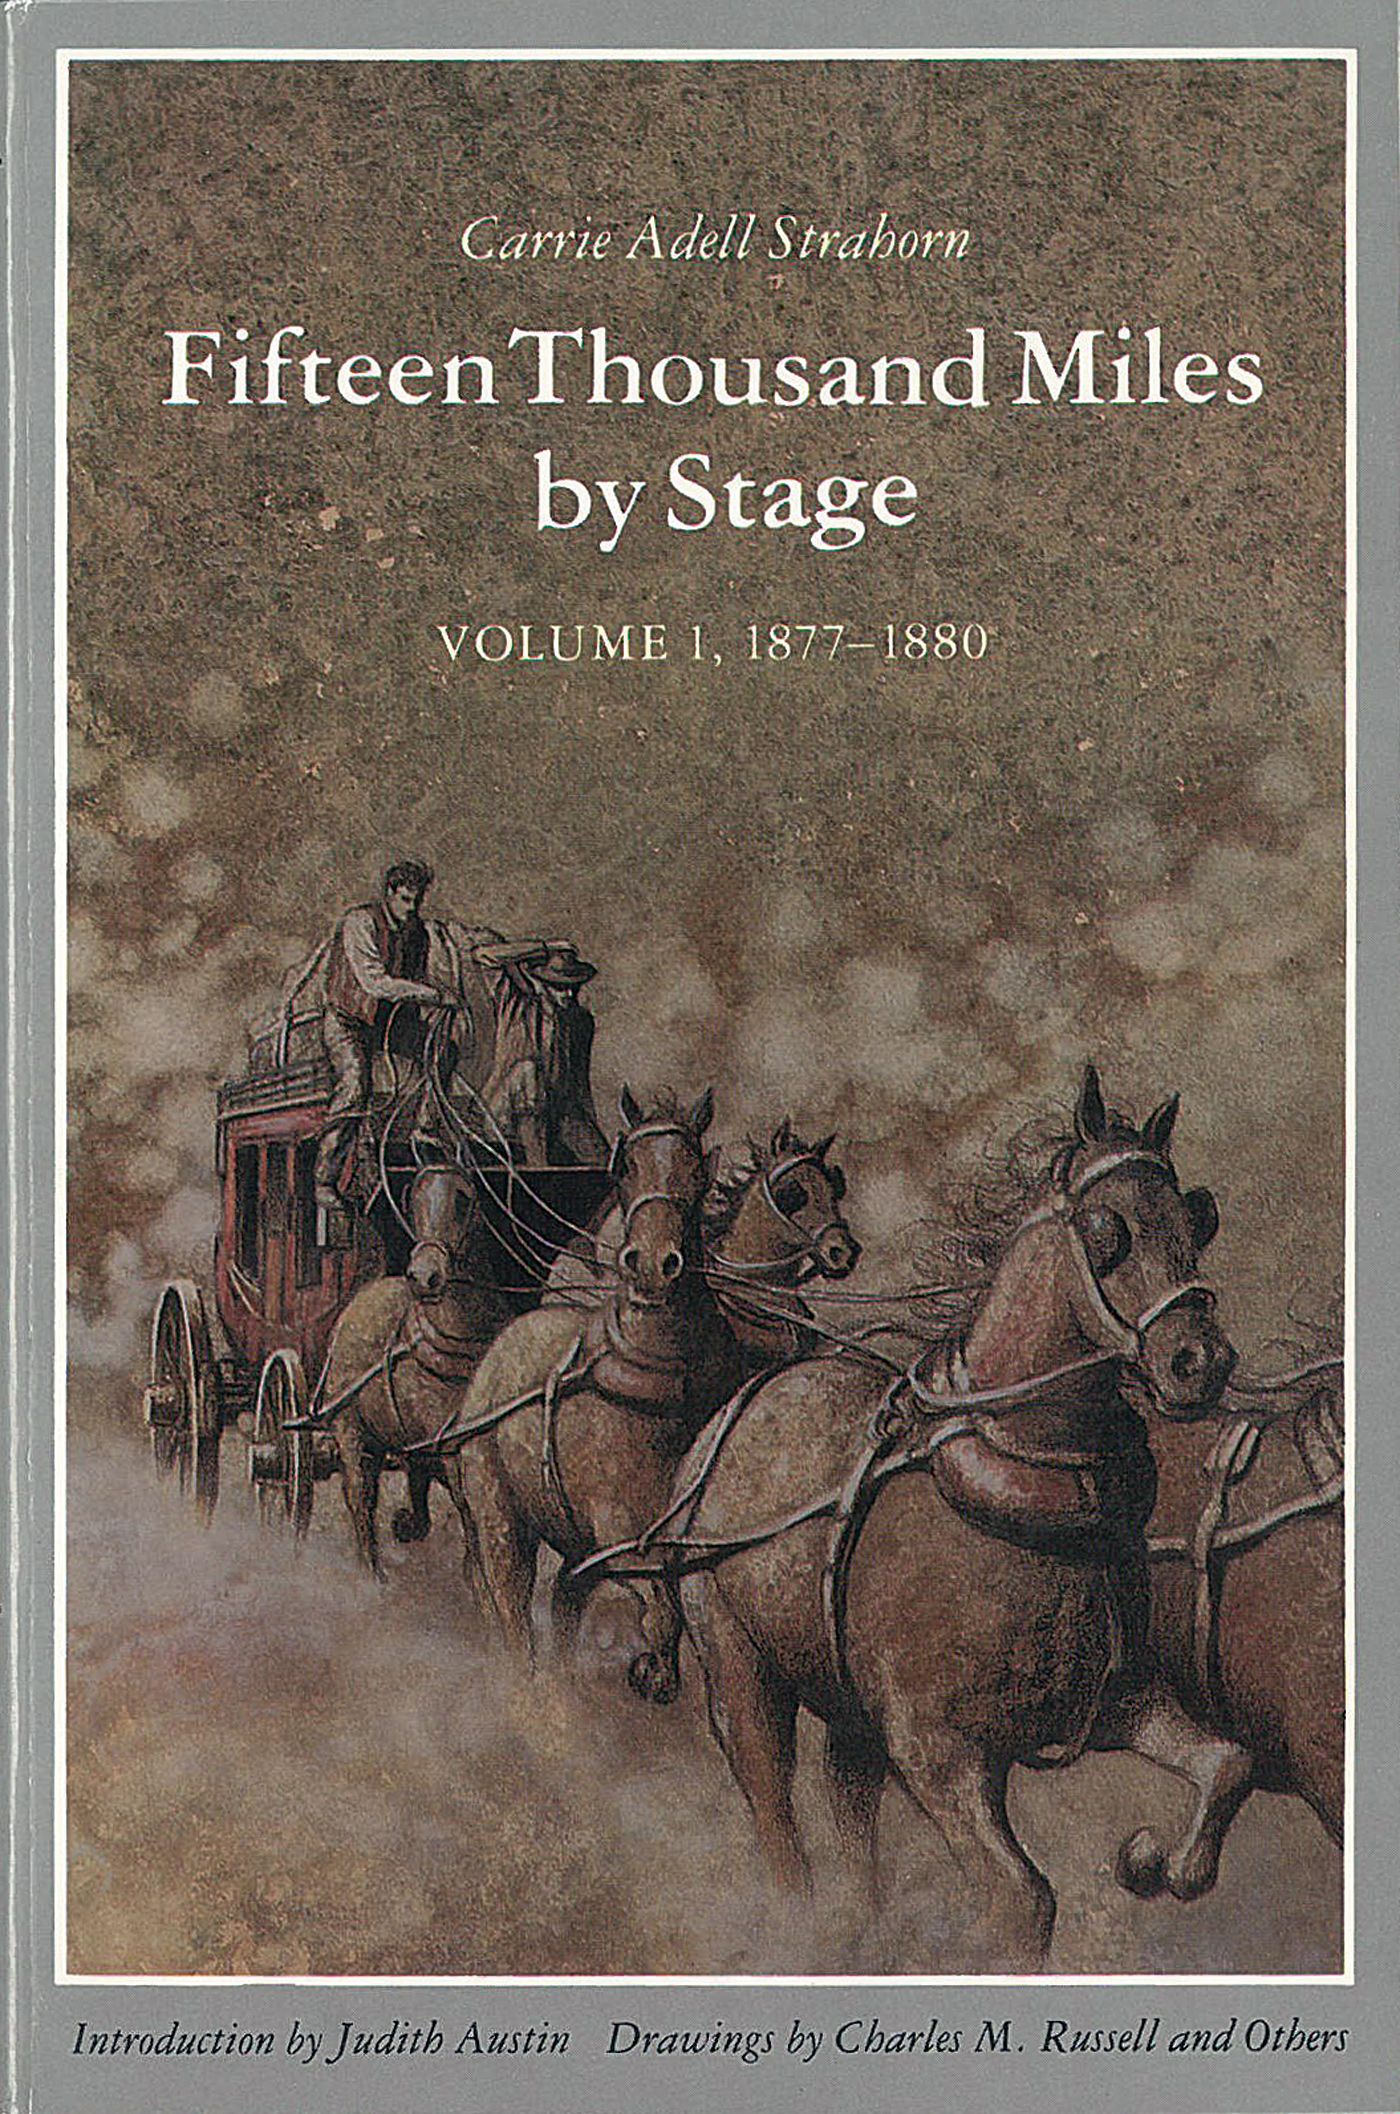 15,000 Mile By Stage book cover